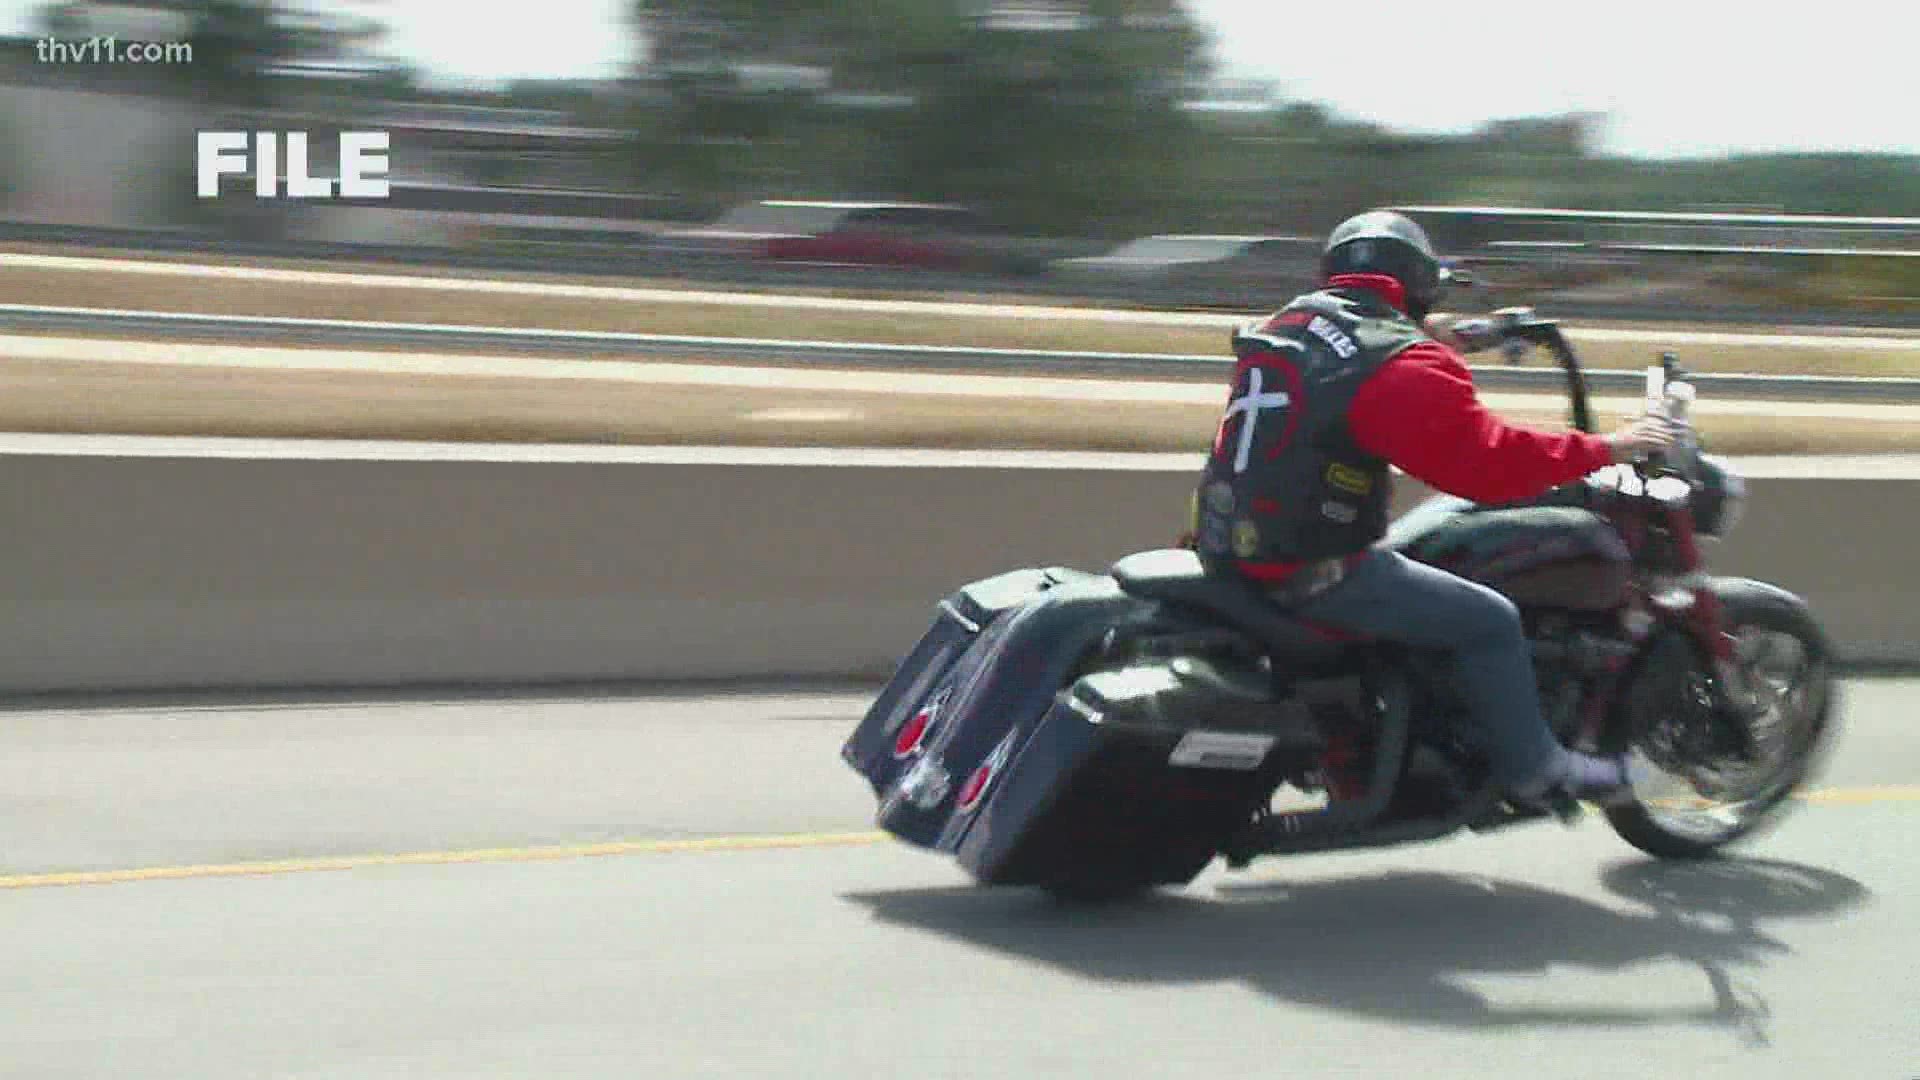 What started as a motorcycle ride to raise money for veterans has switched gears.